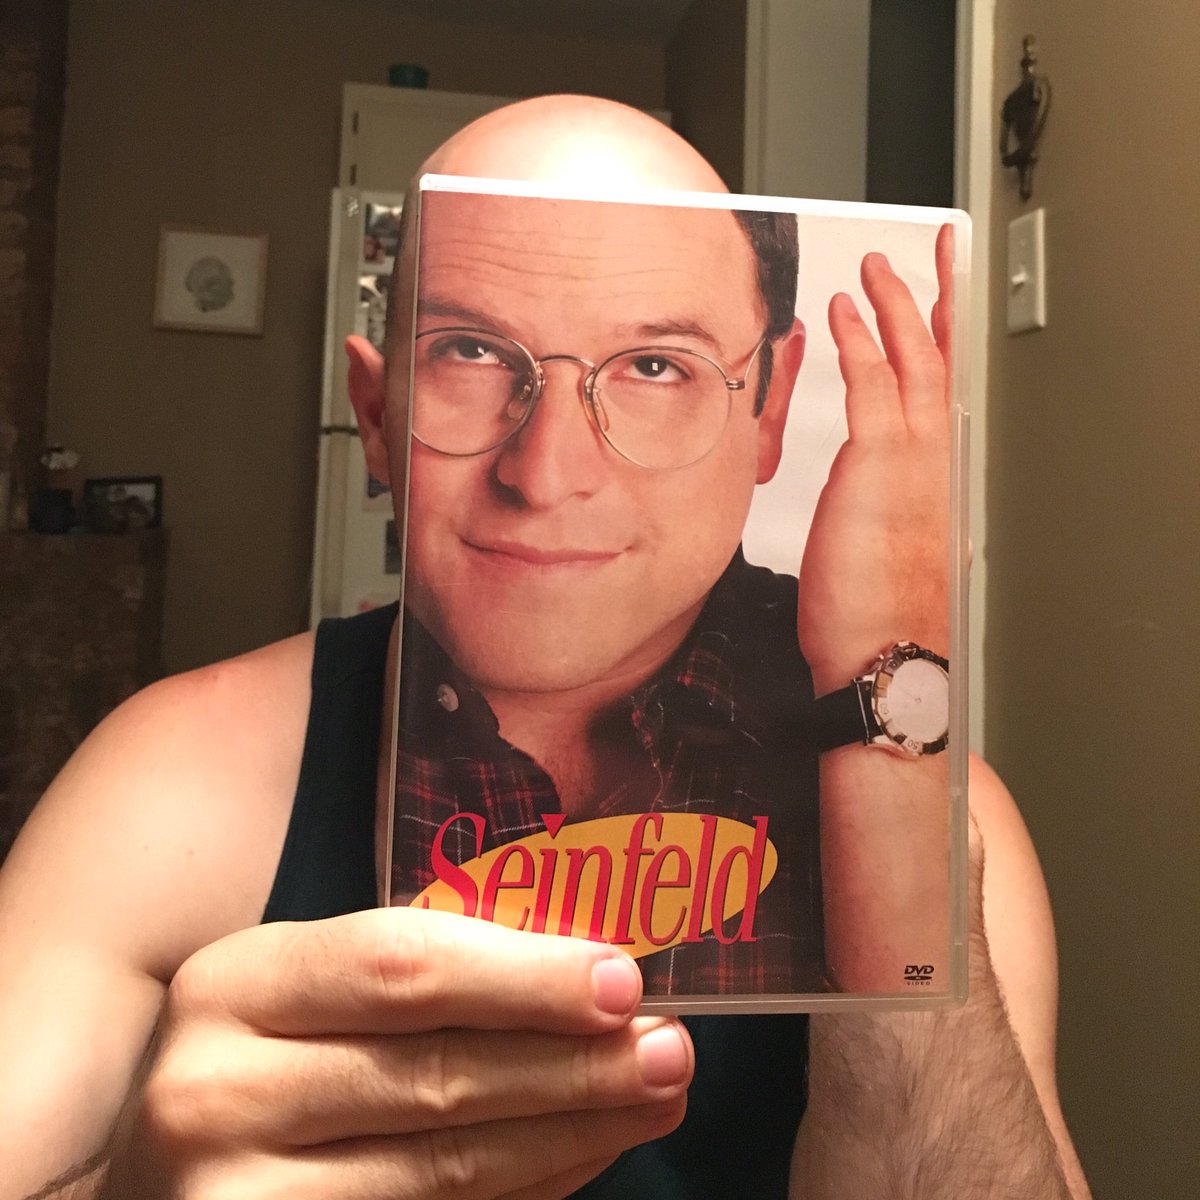 Ben O'Brien poses with the Seinfeld DVD sleeve as though he is George (Ben O'Brien/Kelly Lasserre/Twitter)